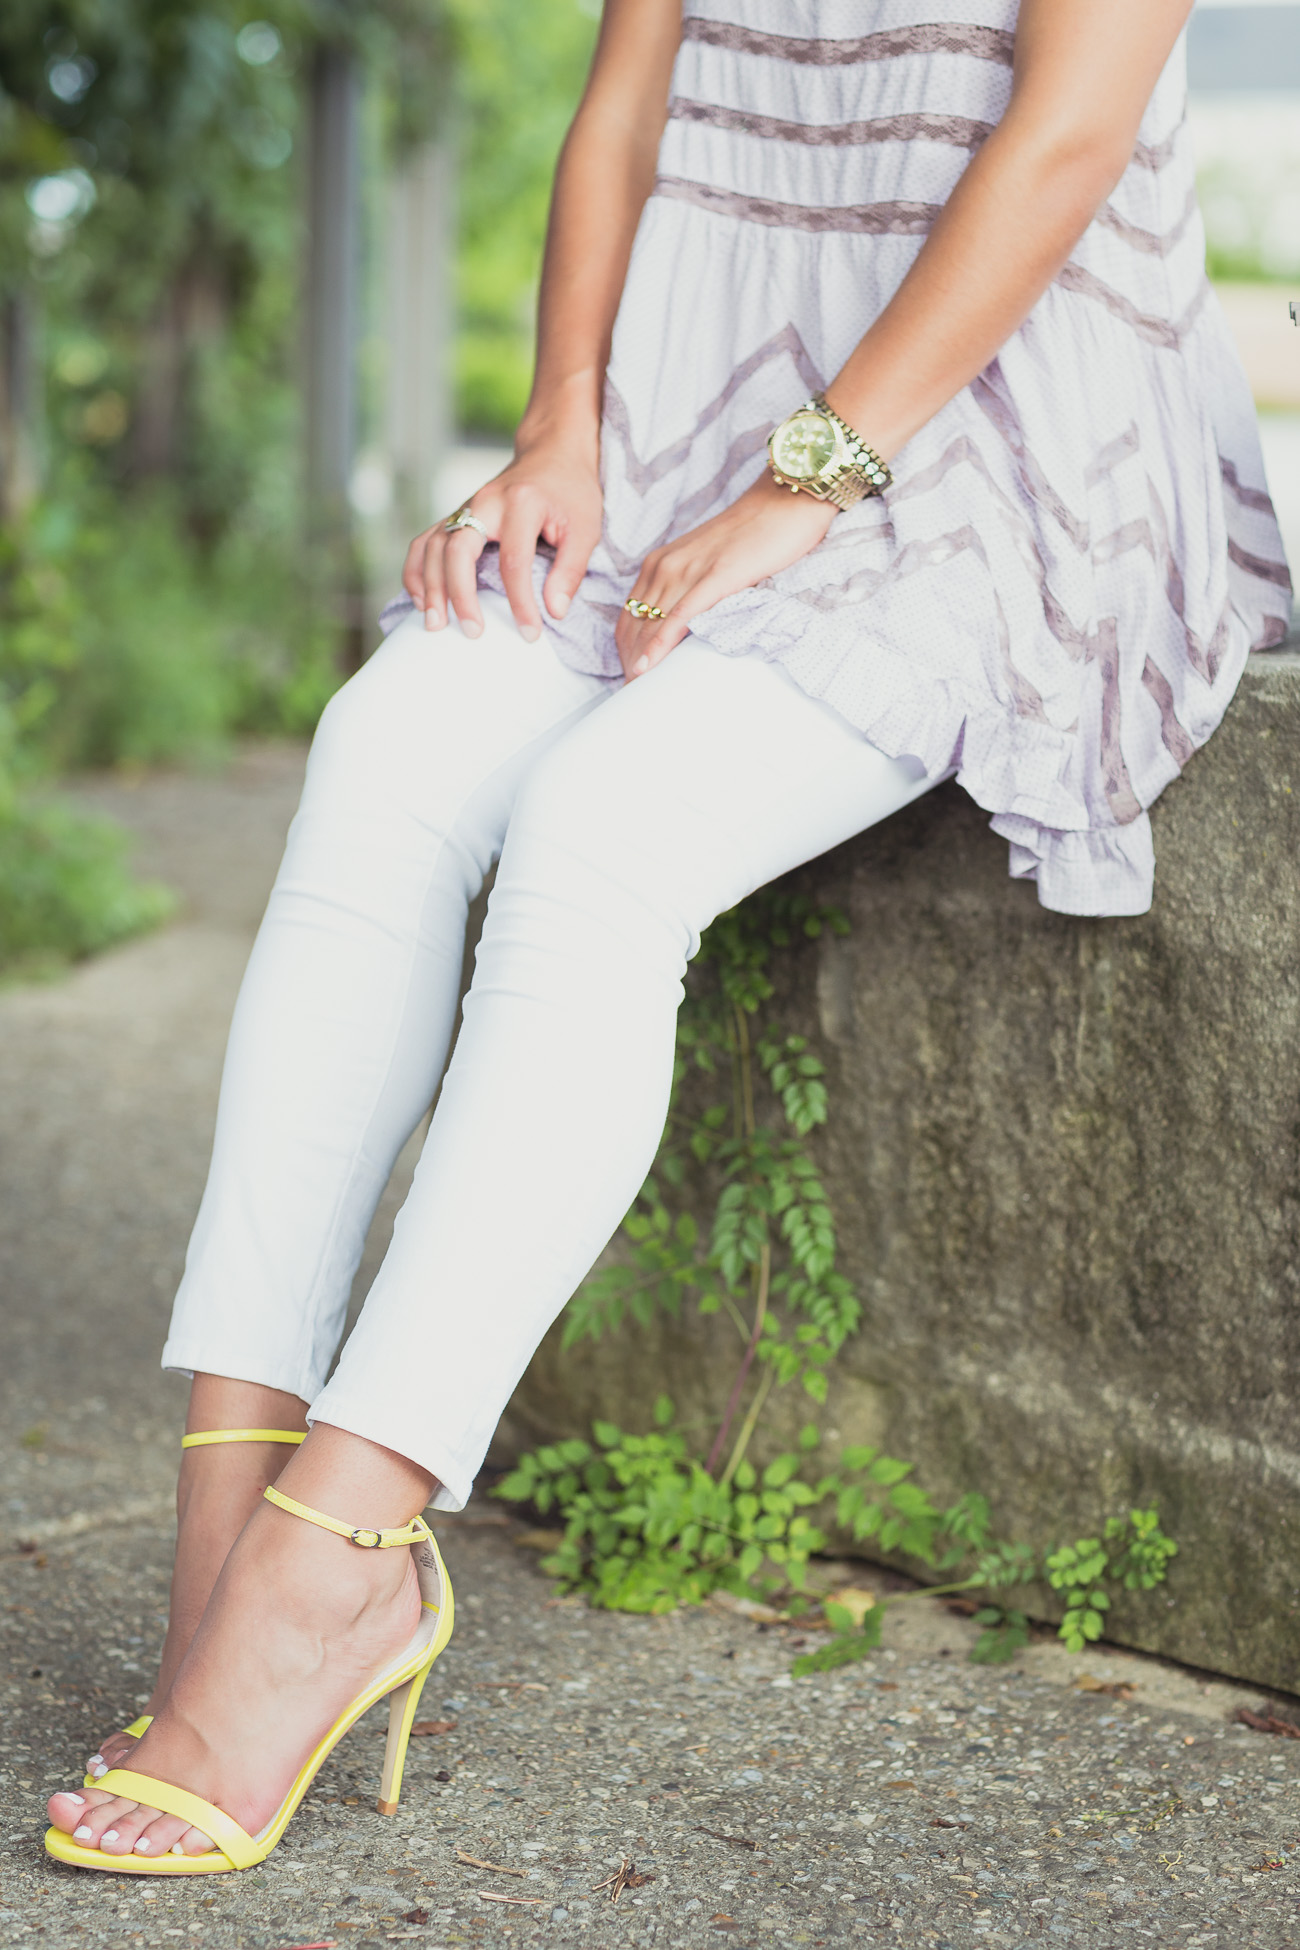 neon steve madden sandals // a southern drawl